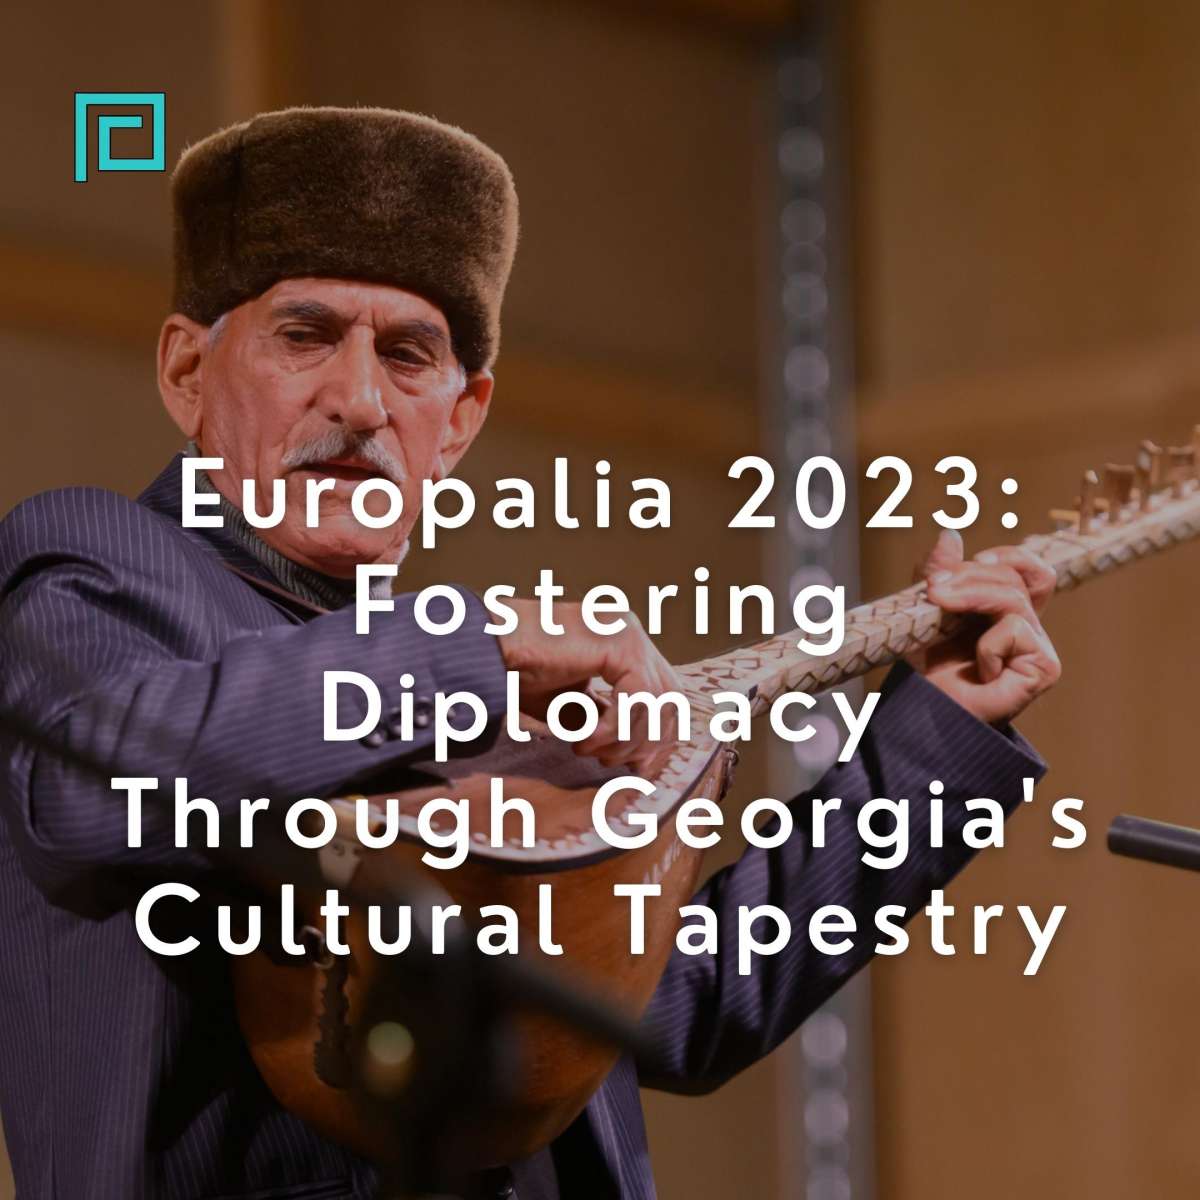 Europalia 2023: Fostering Diplomacy Through Georgia's Cultural Tapestry